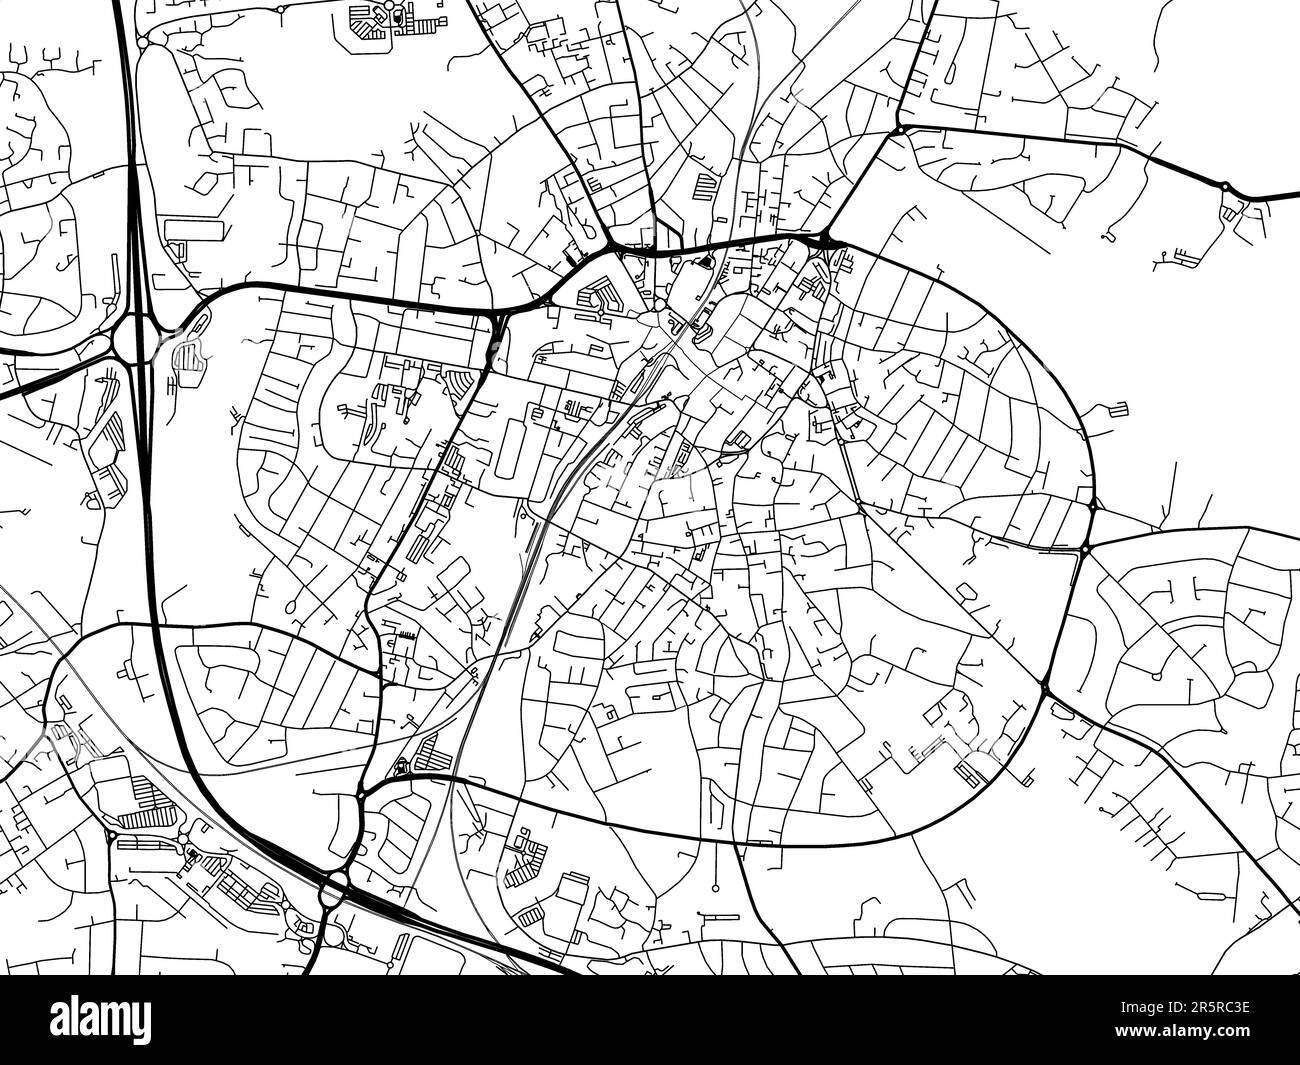 Road map of the city of Walsall in the United Kingdom on a white ...